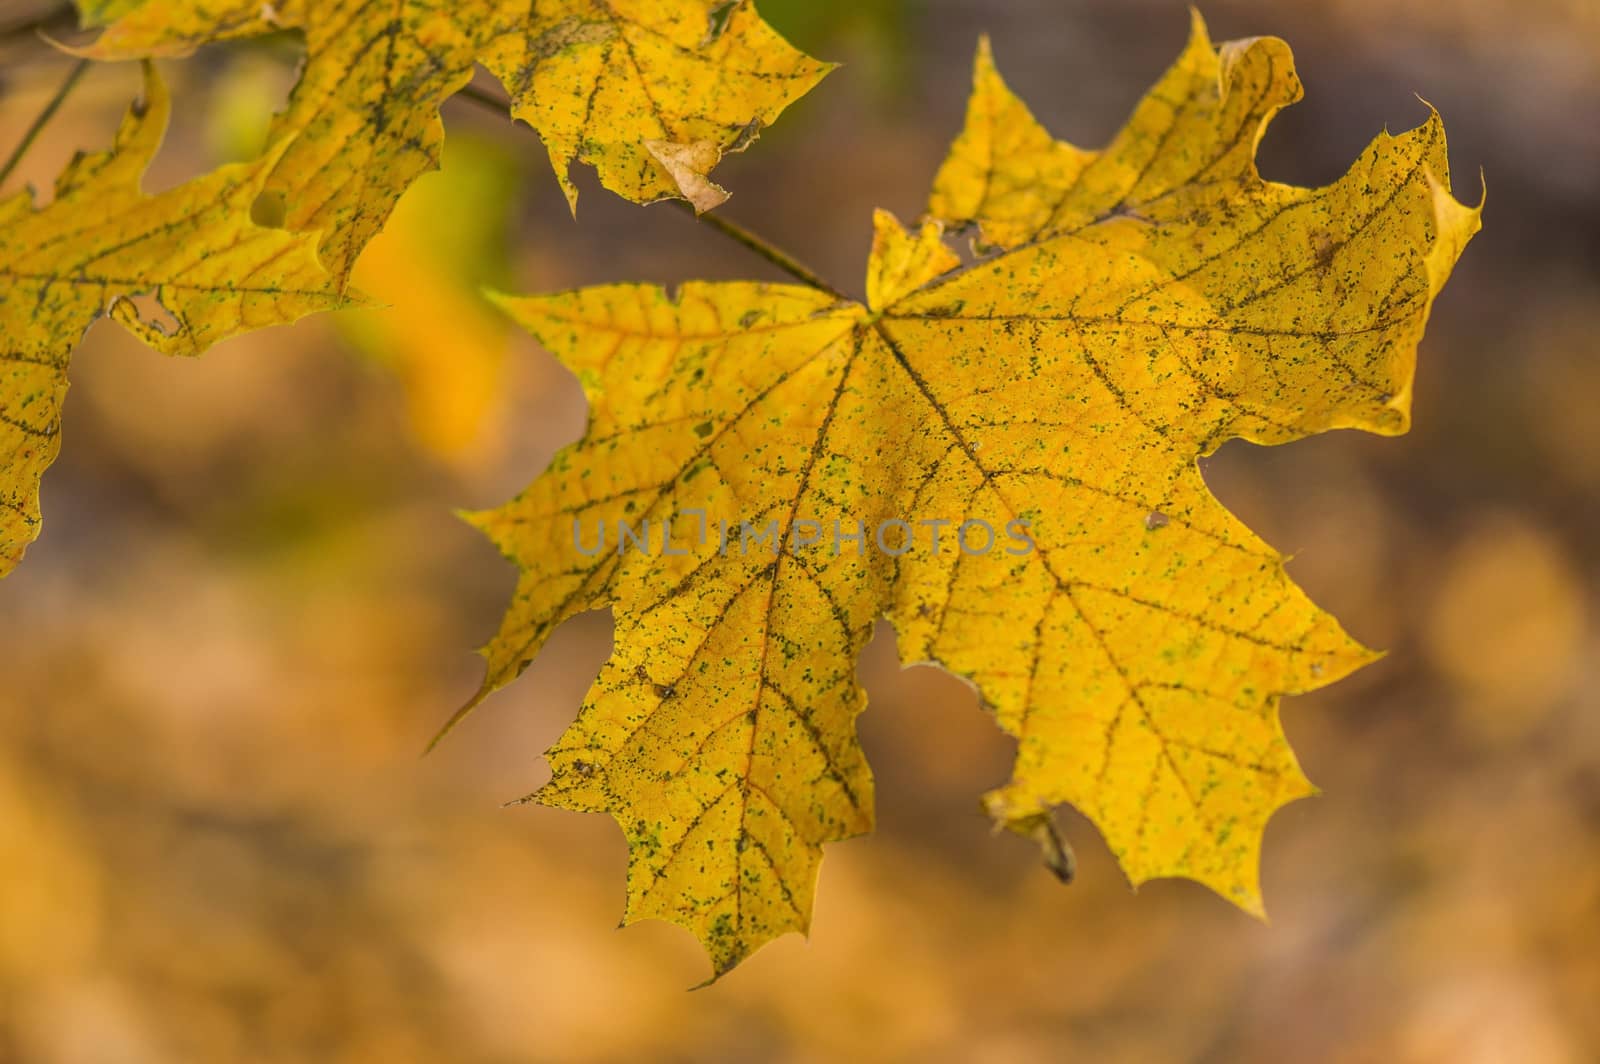 Detail of a yellow autumn leaves in sunlight